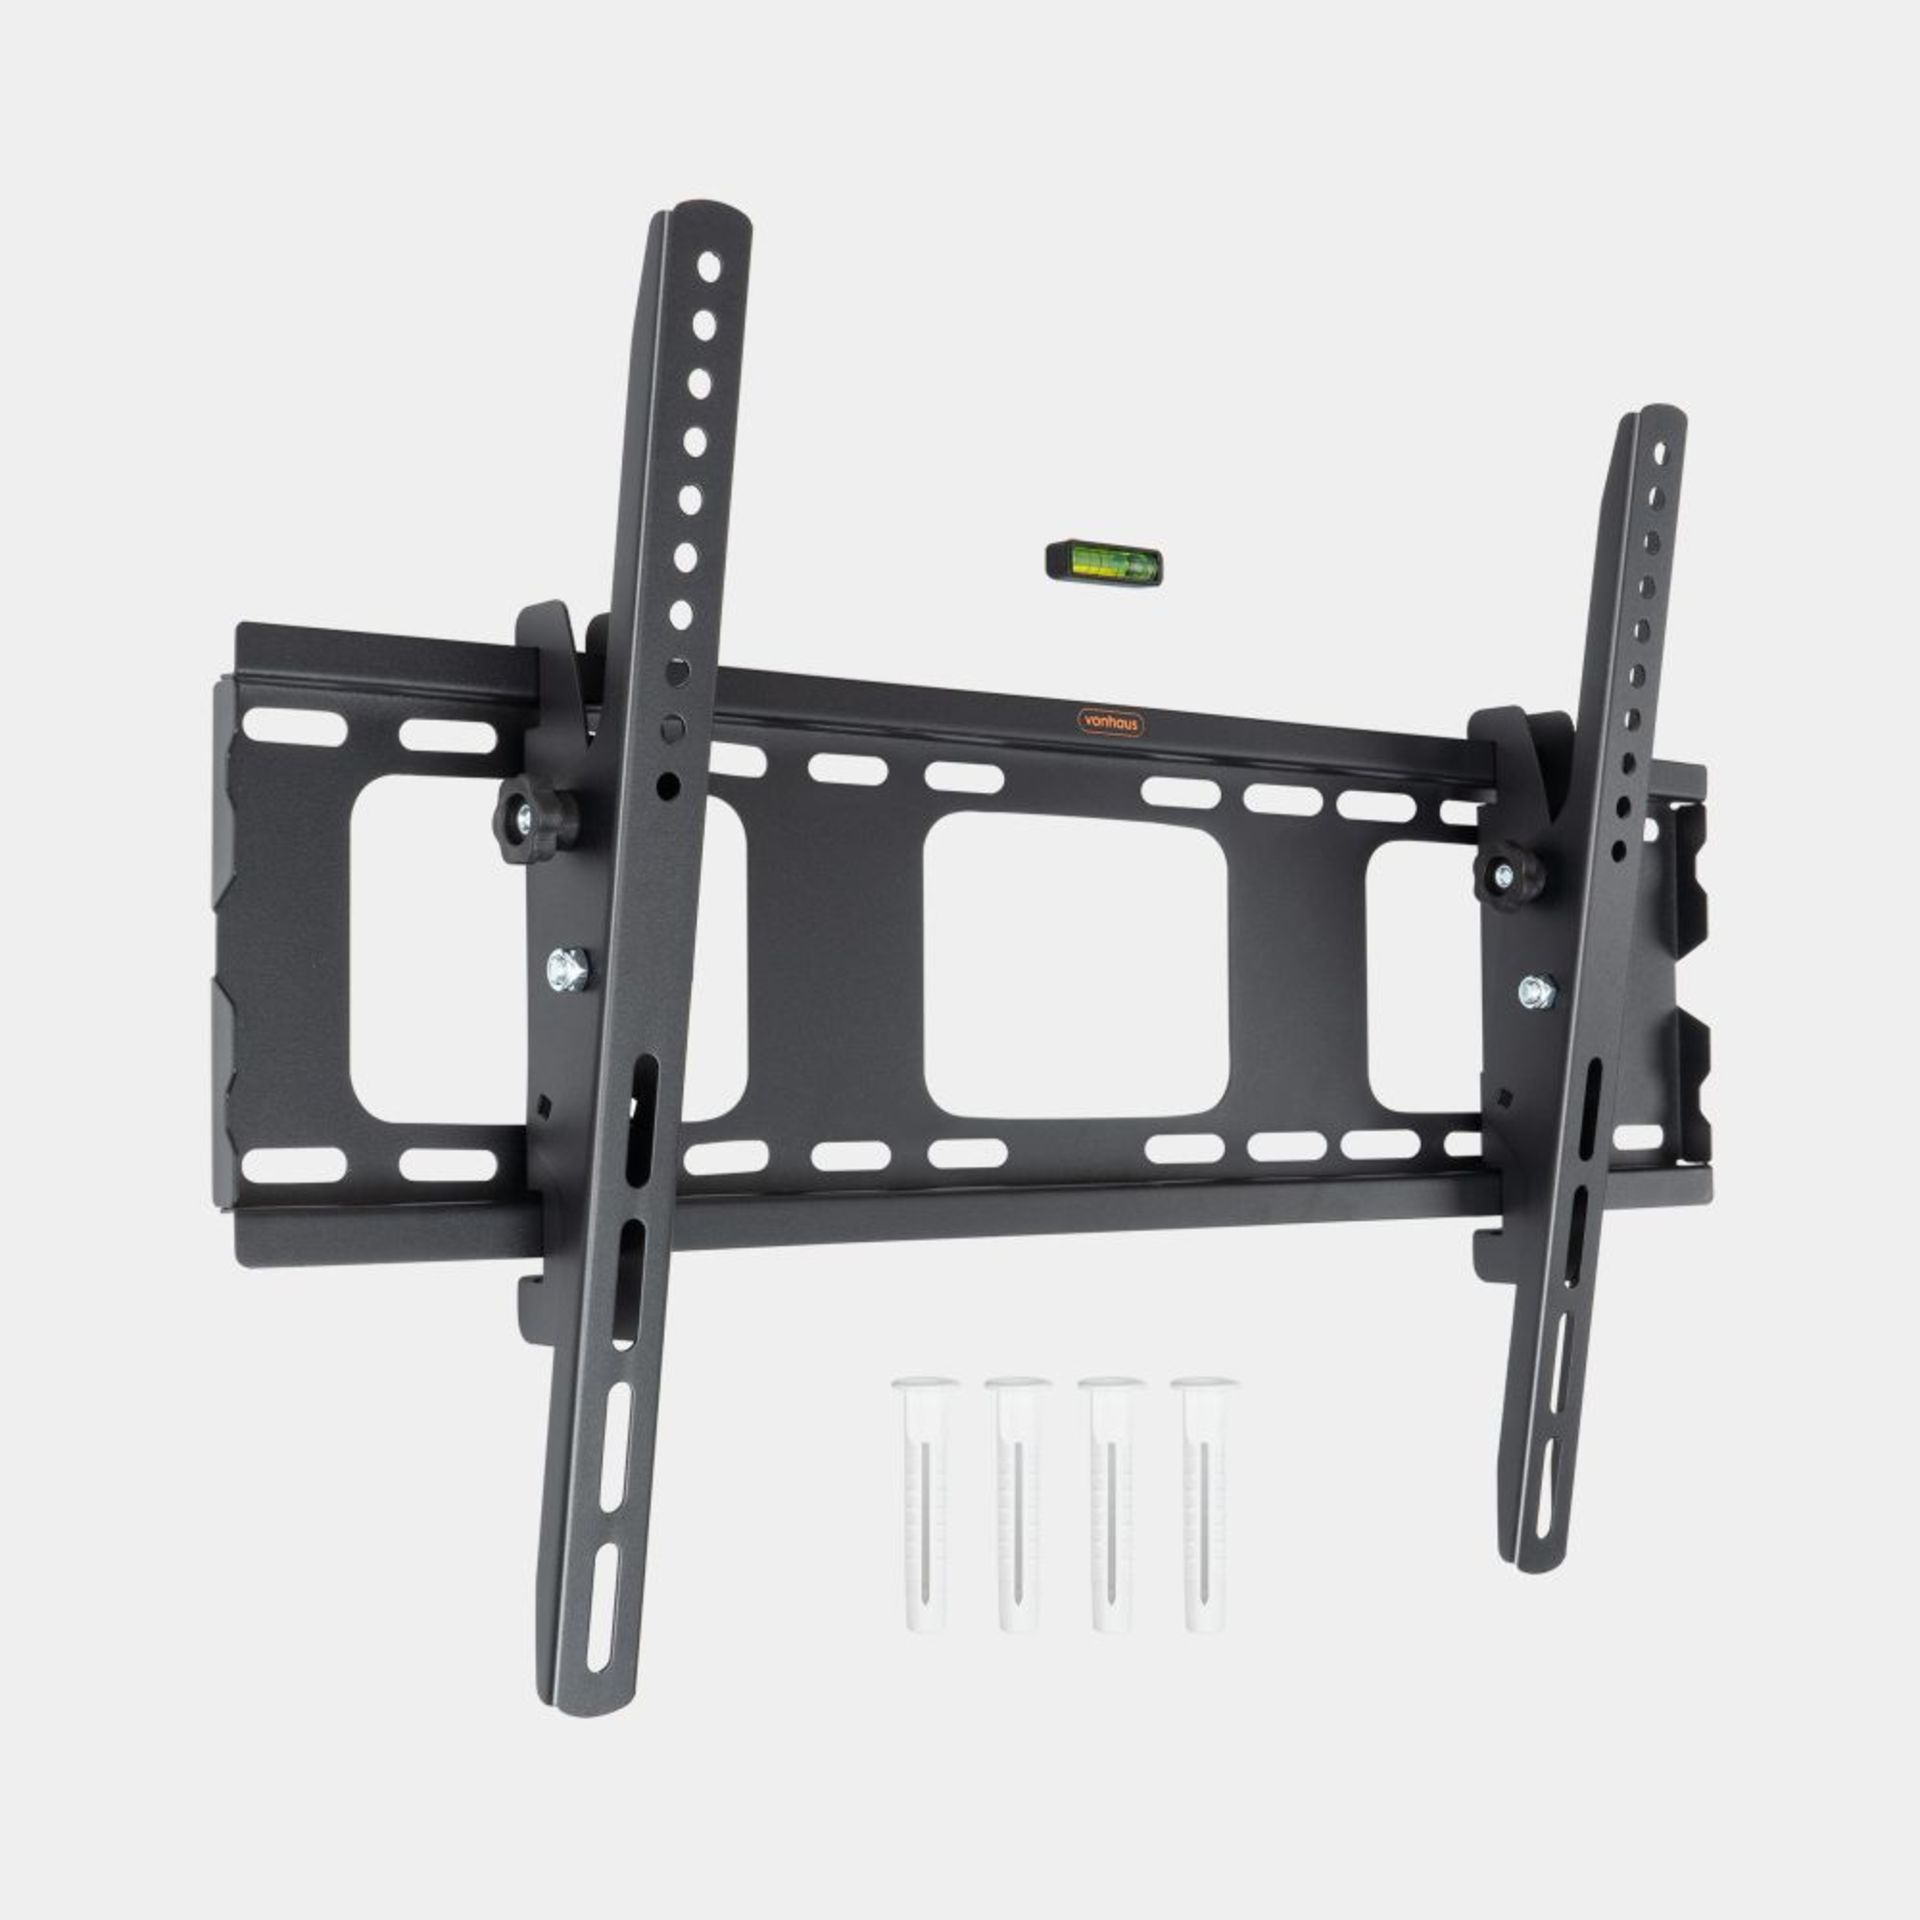 32-70 inch Tilt TV Bracket. - P3. Transform your TV viewing experience with this sleek, tilting wall